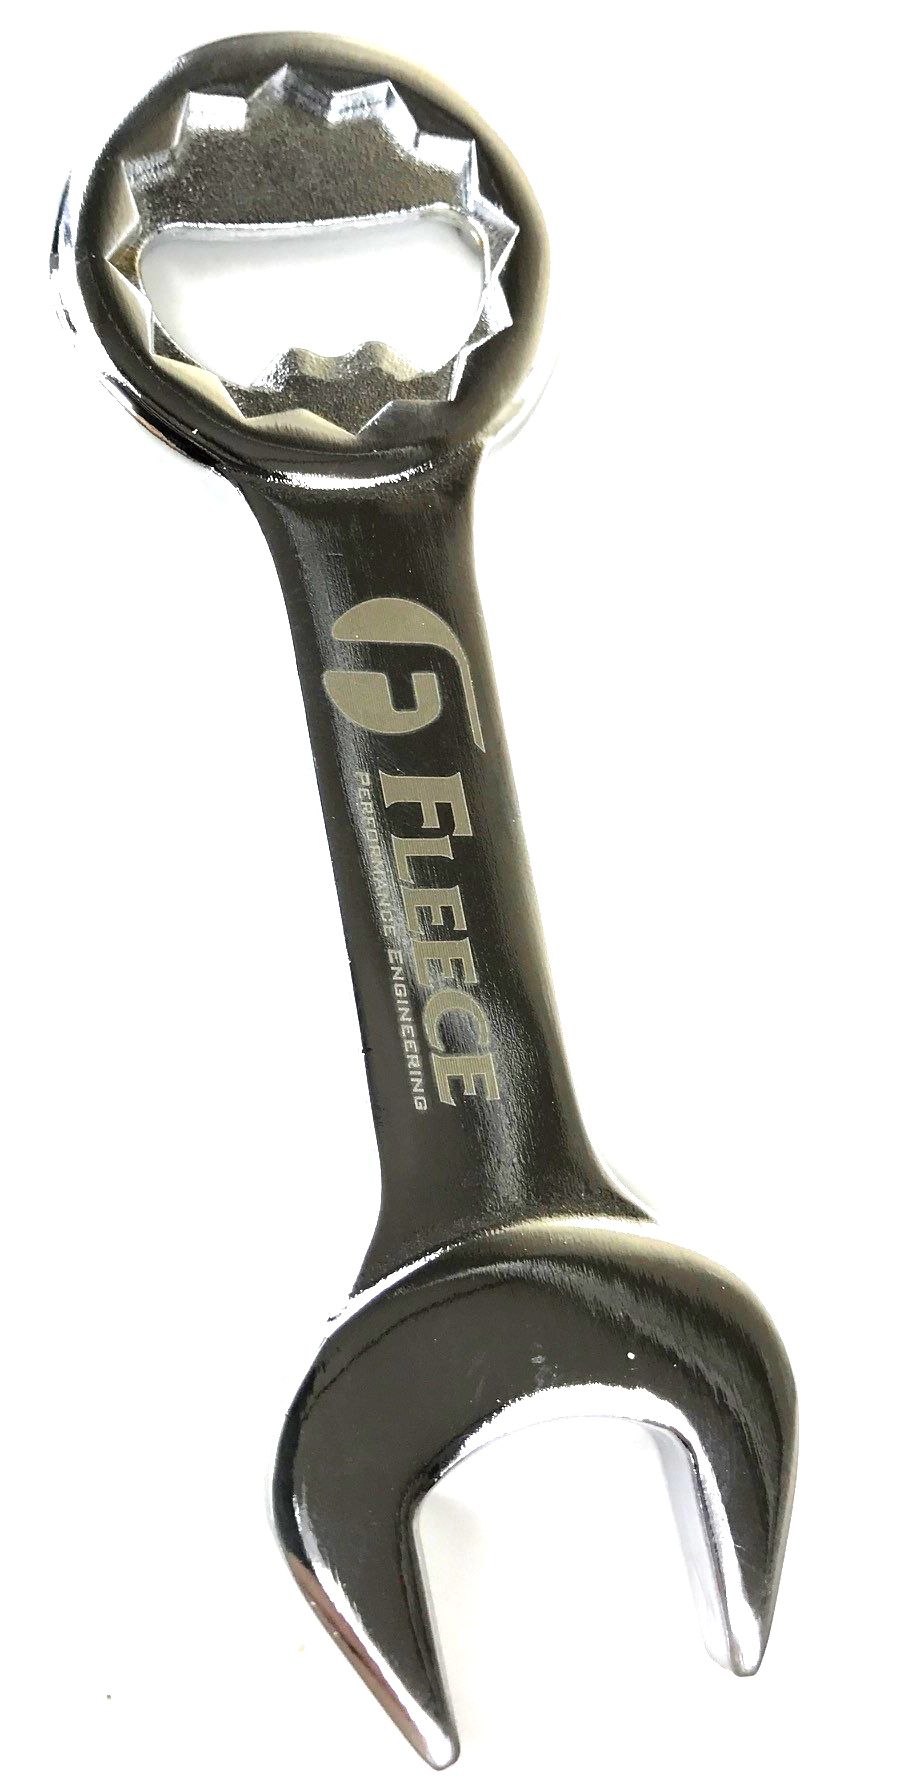 FPE-BTL-OPN Fleece Performance Bottle Opener 17mm wrench that works on your injection lines and opens you drinks Hell On Wheels Canada